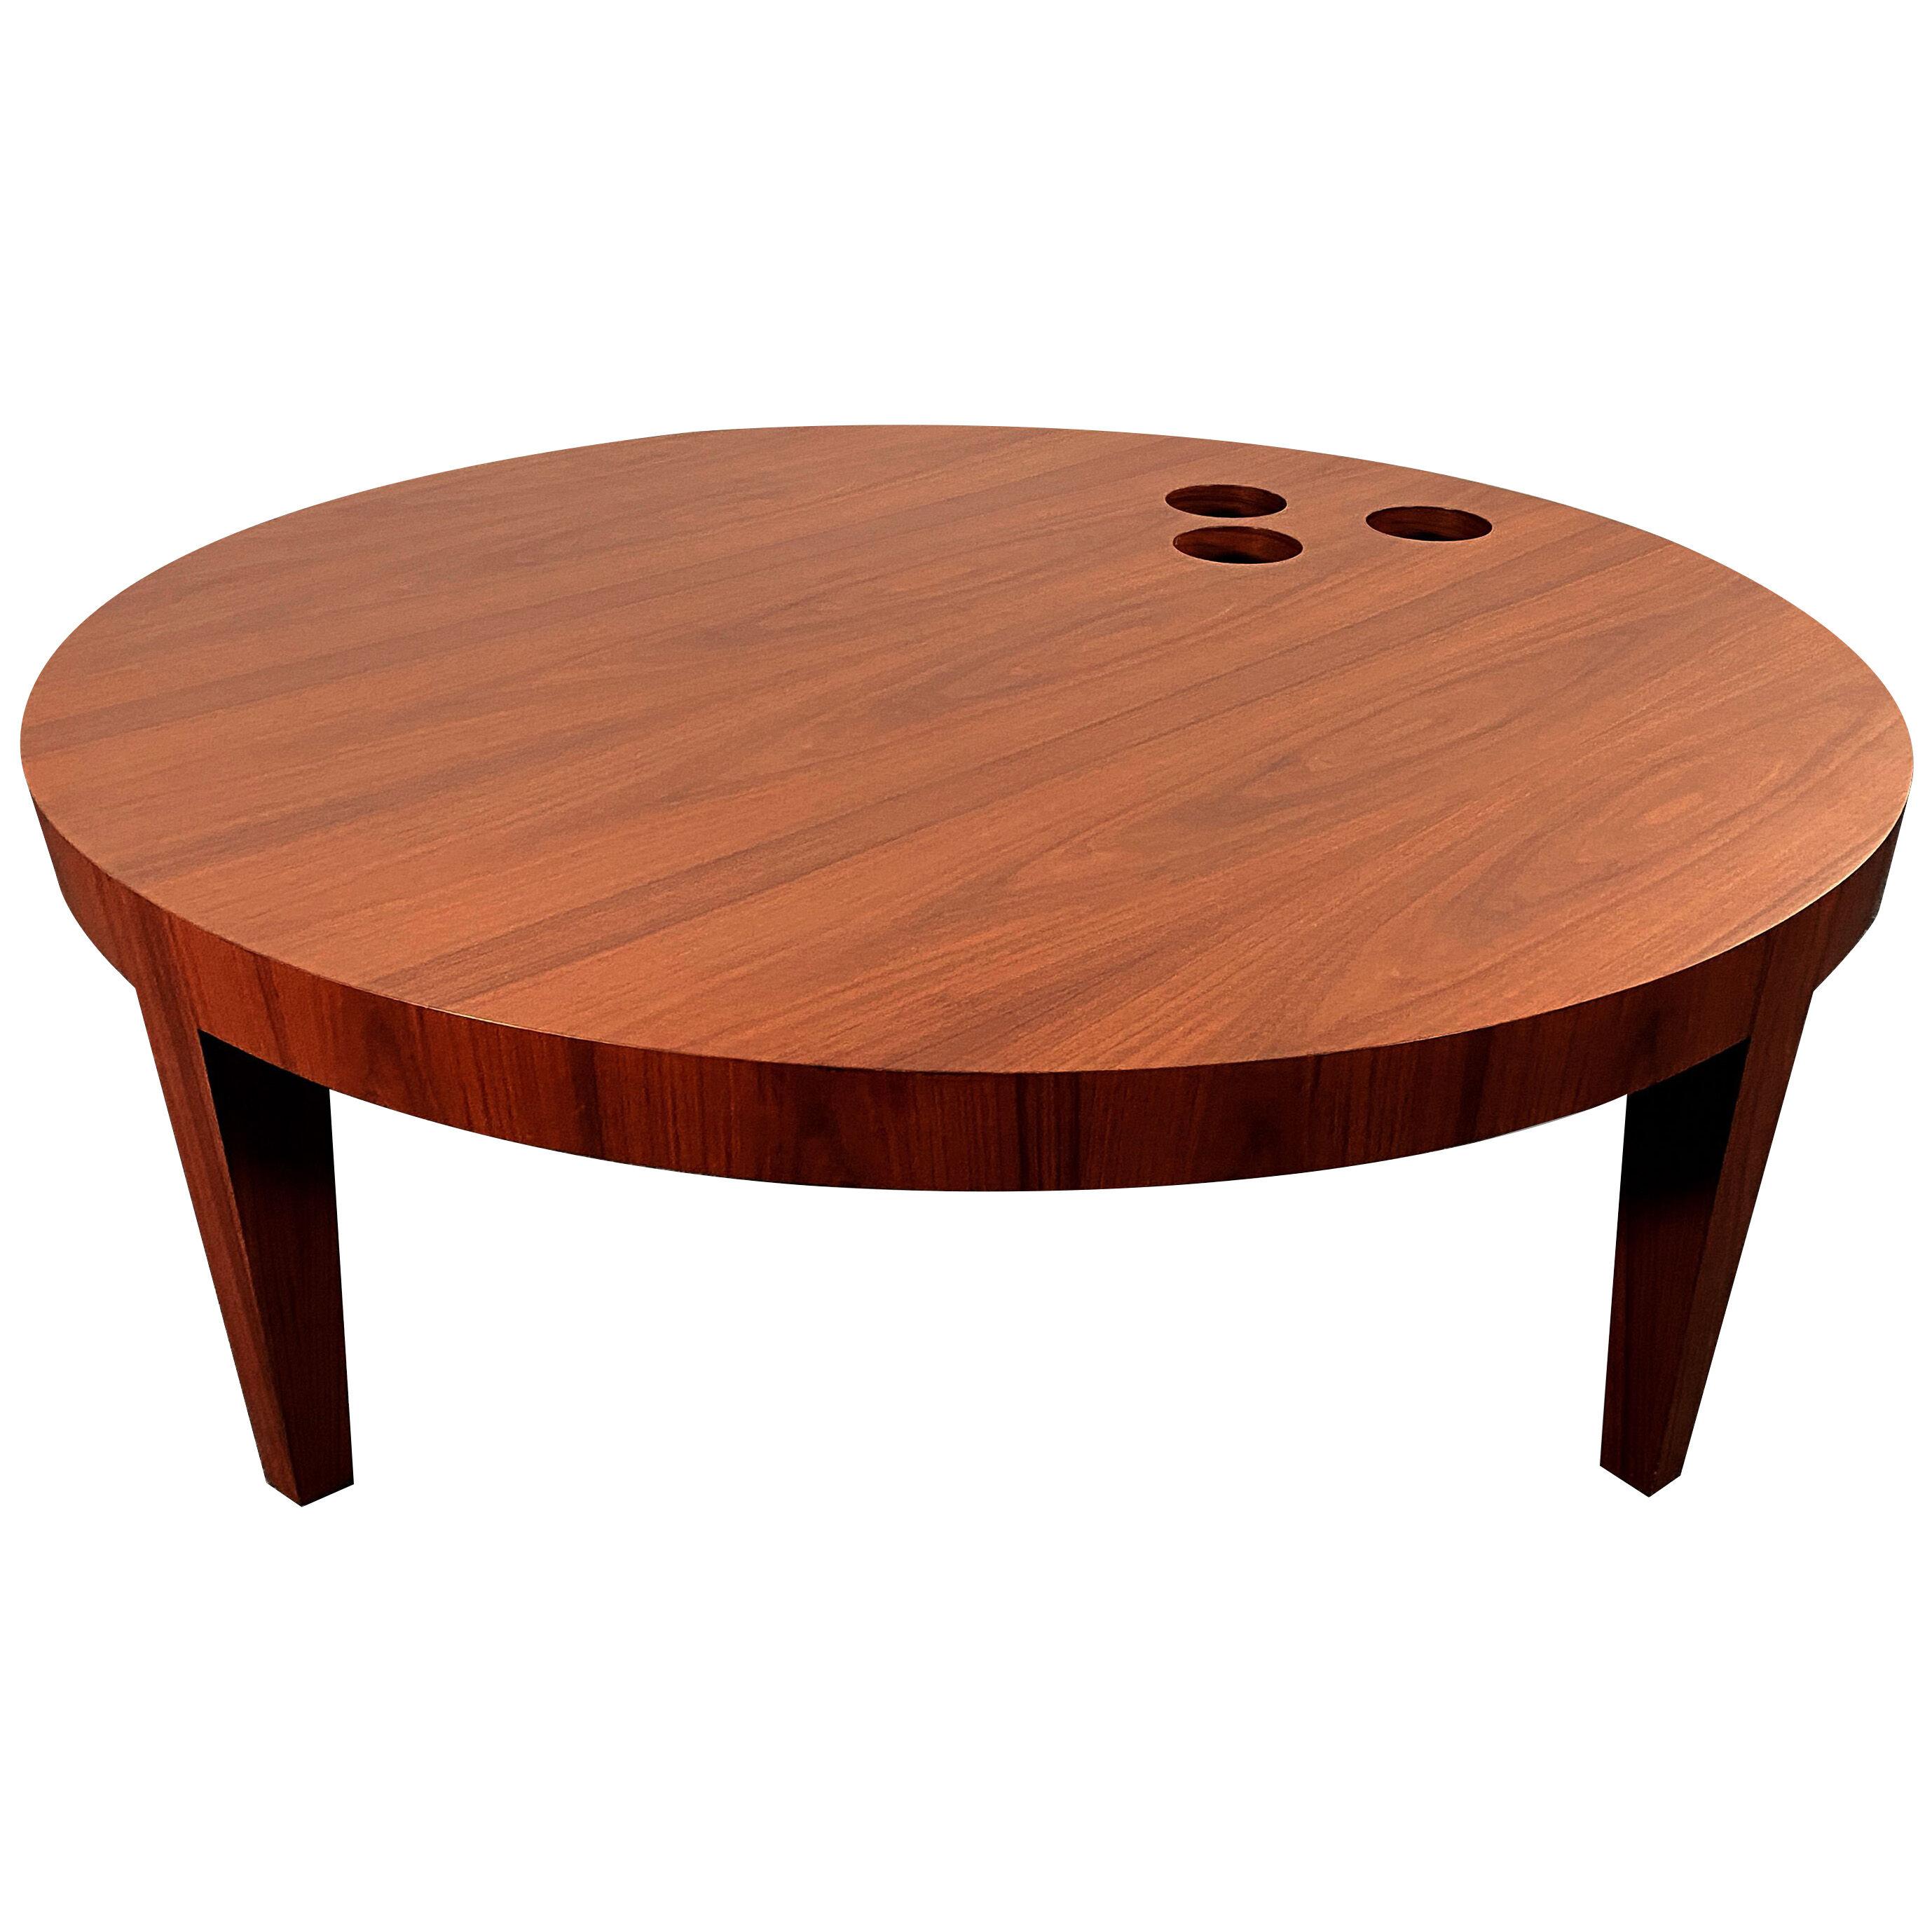 Unique Bespoke American Walnut Round Coffee Table with Round Cutouts